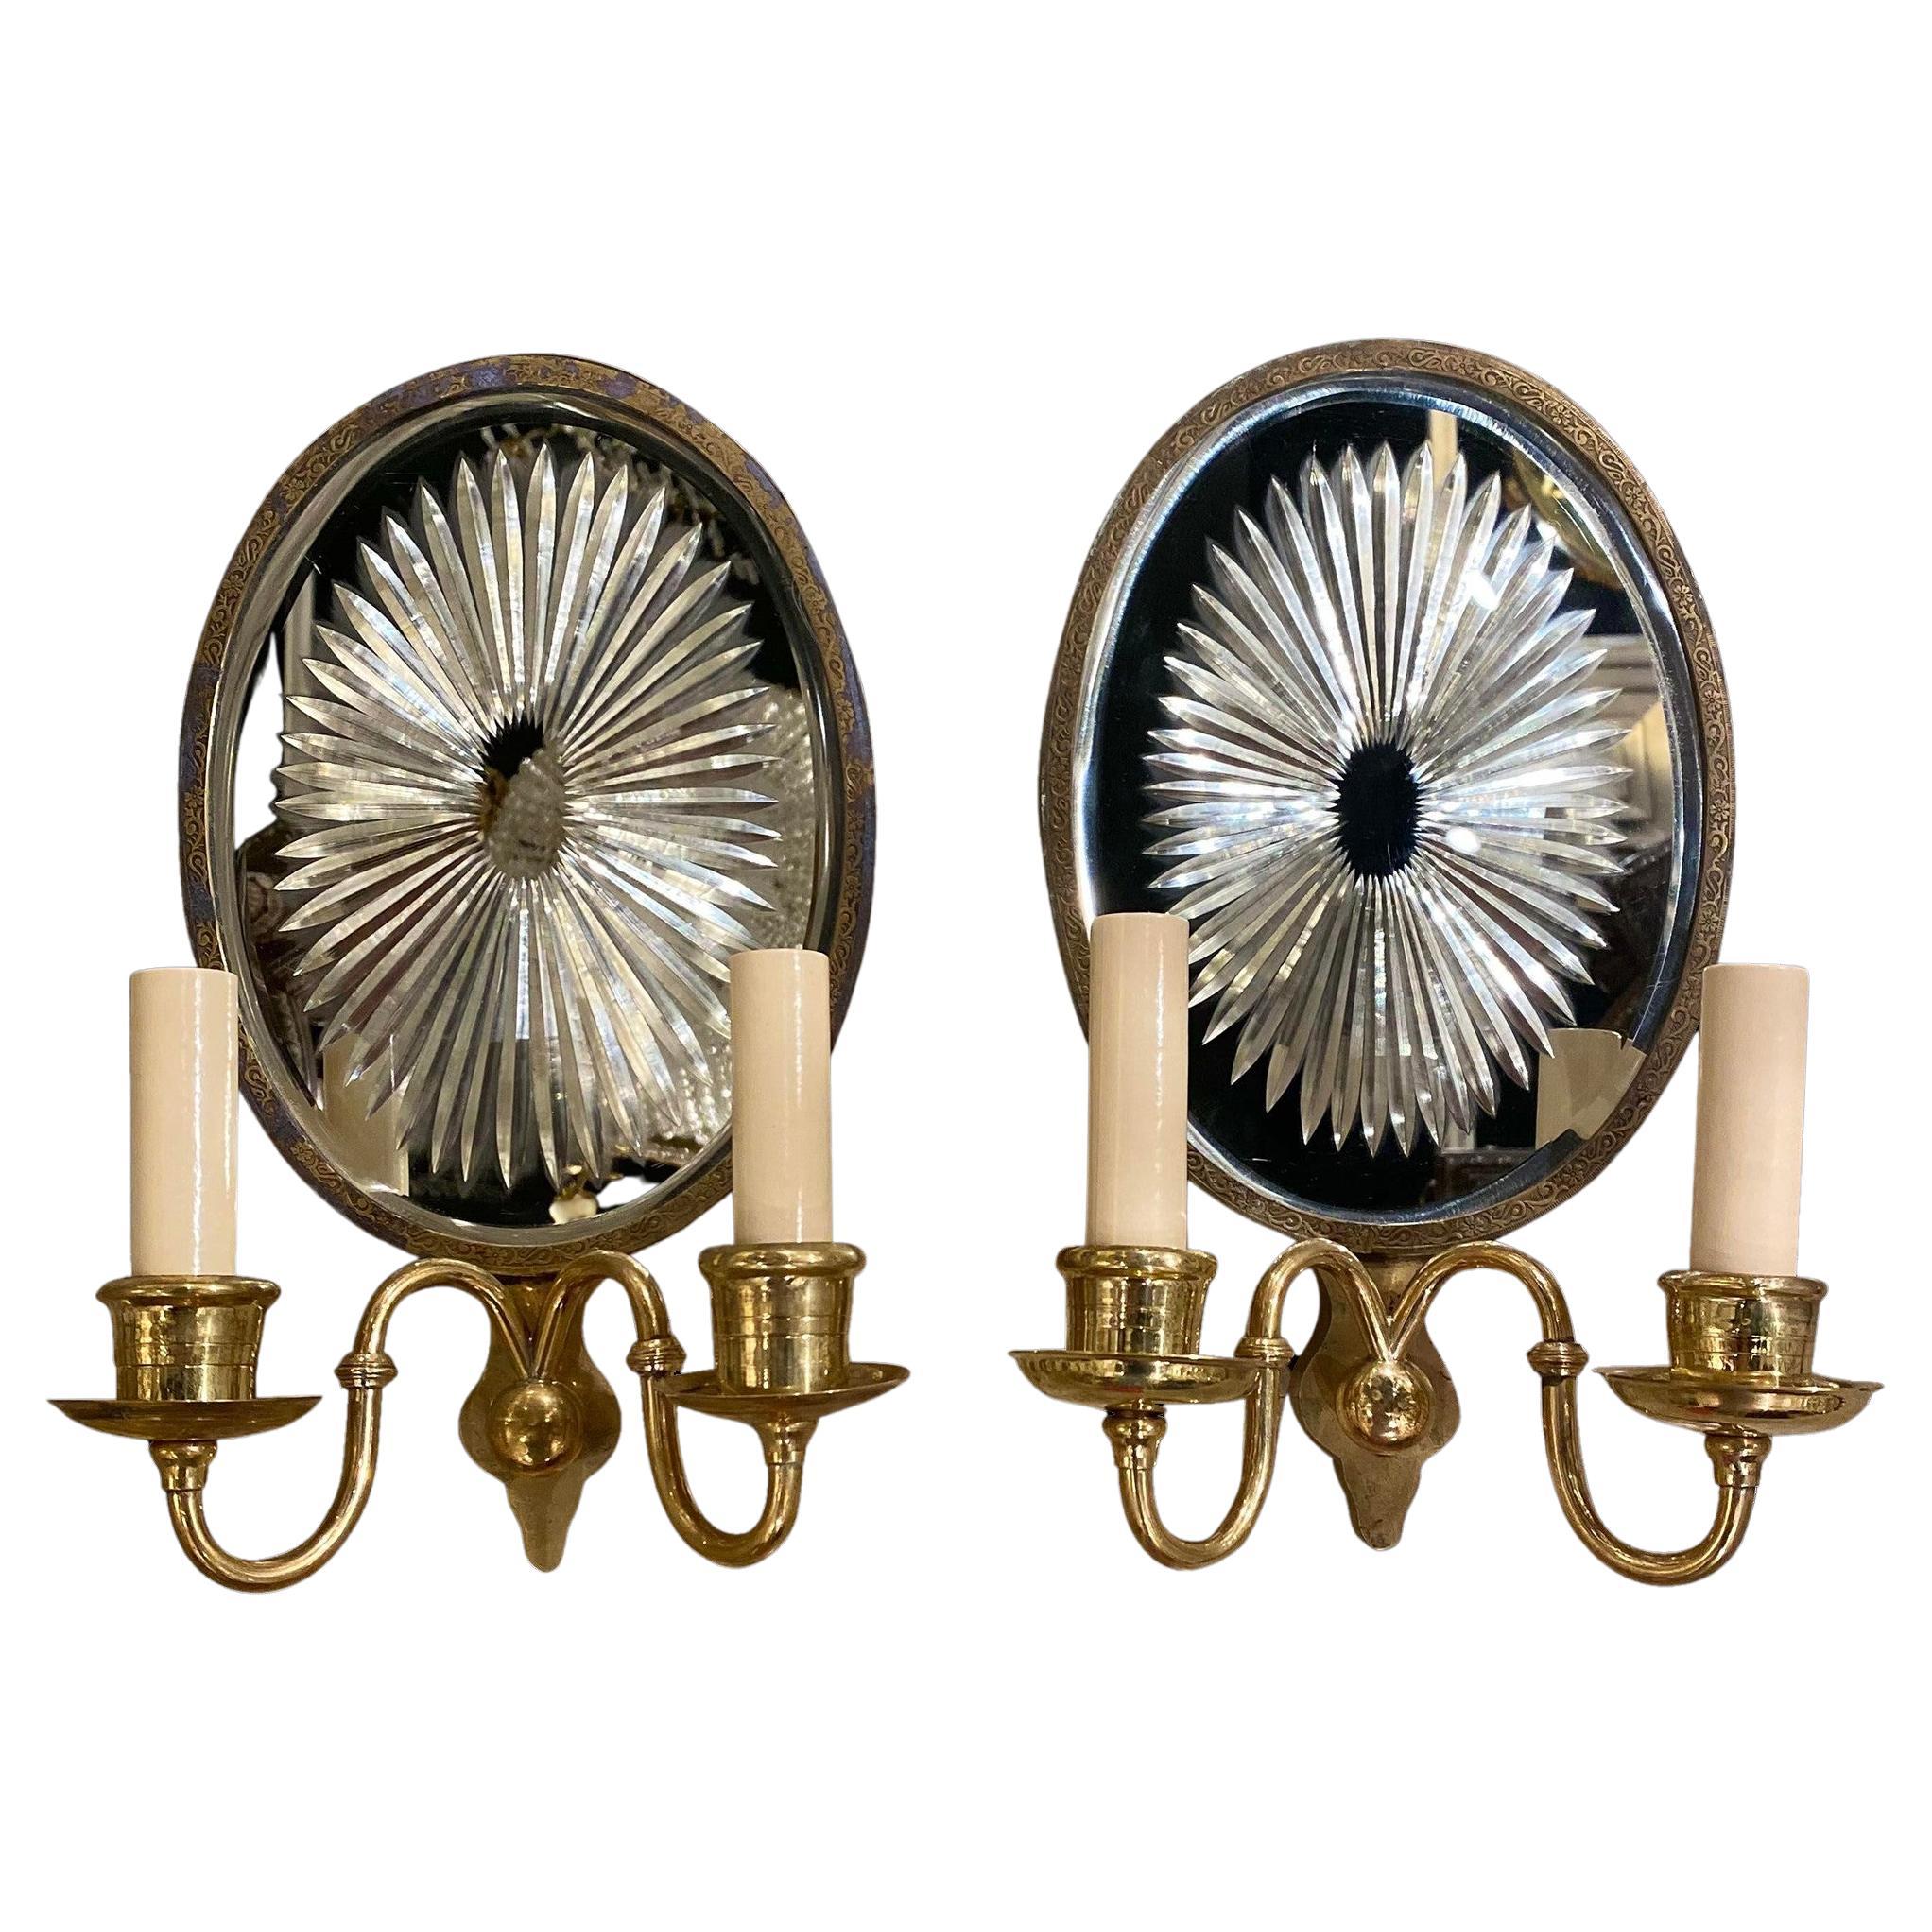 1920's Caldwell Double Lights Sconces with Mirror Backplate